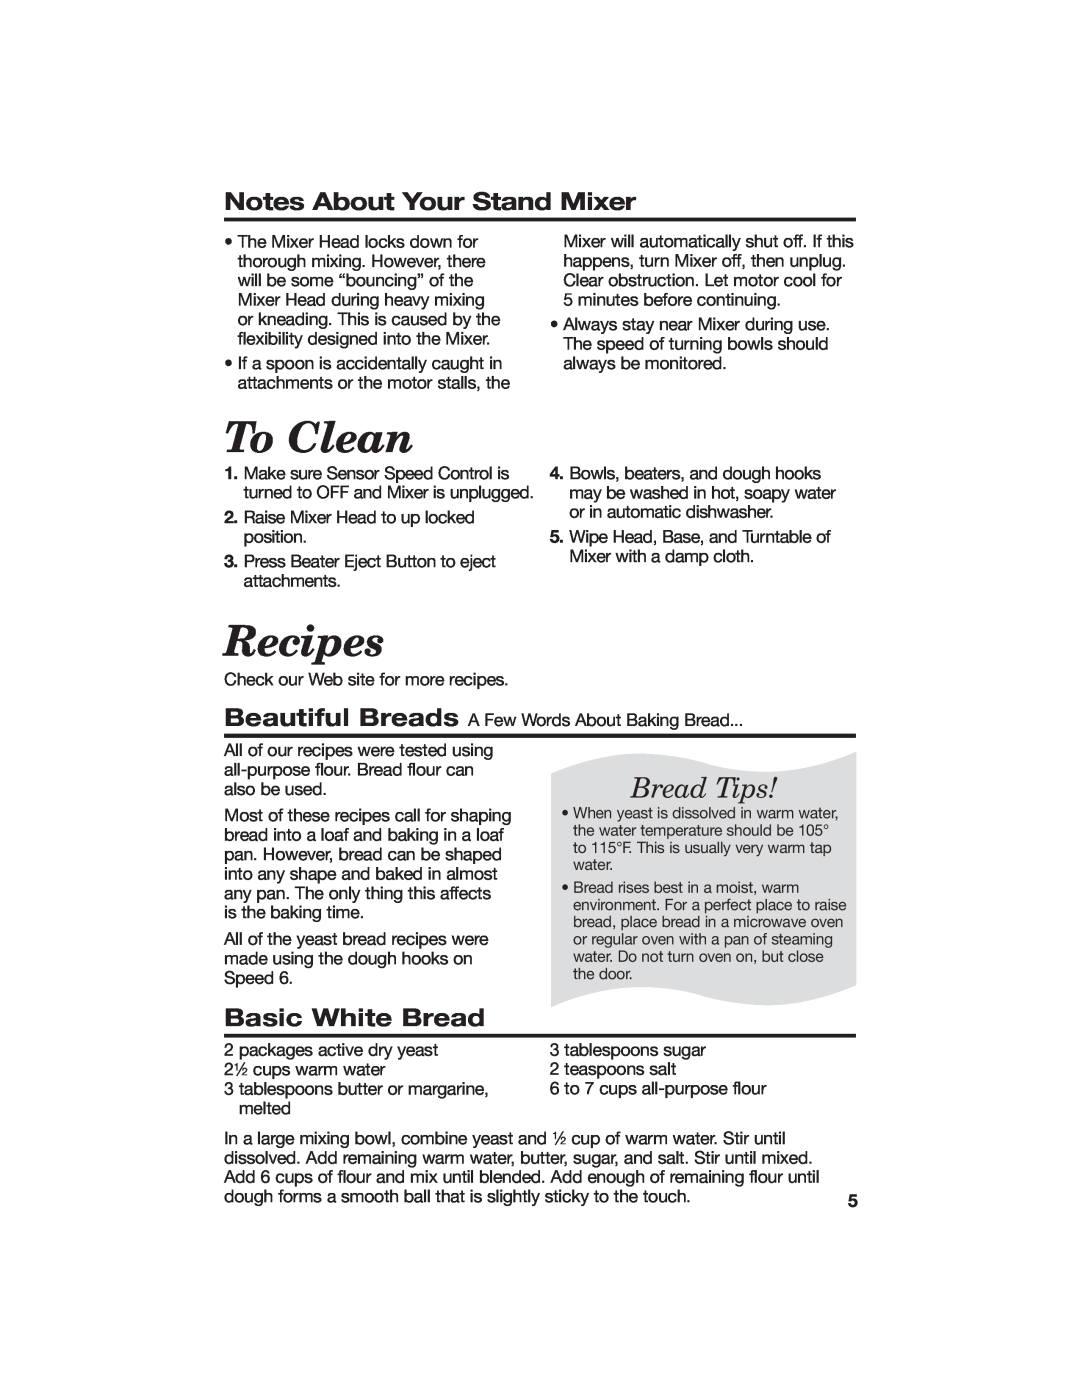 Hamilton Beach 840056500 manual To Clean, Recipes, Notes About Your Stand Mixer, Basic White Bread, Bread Tips 